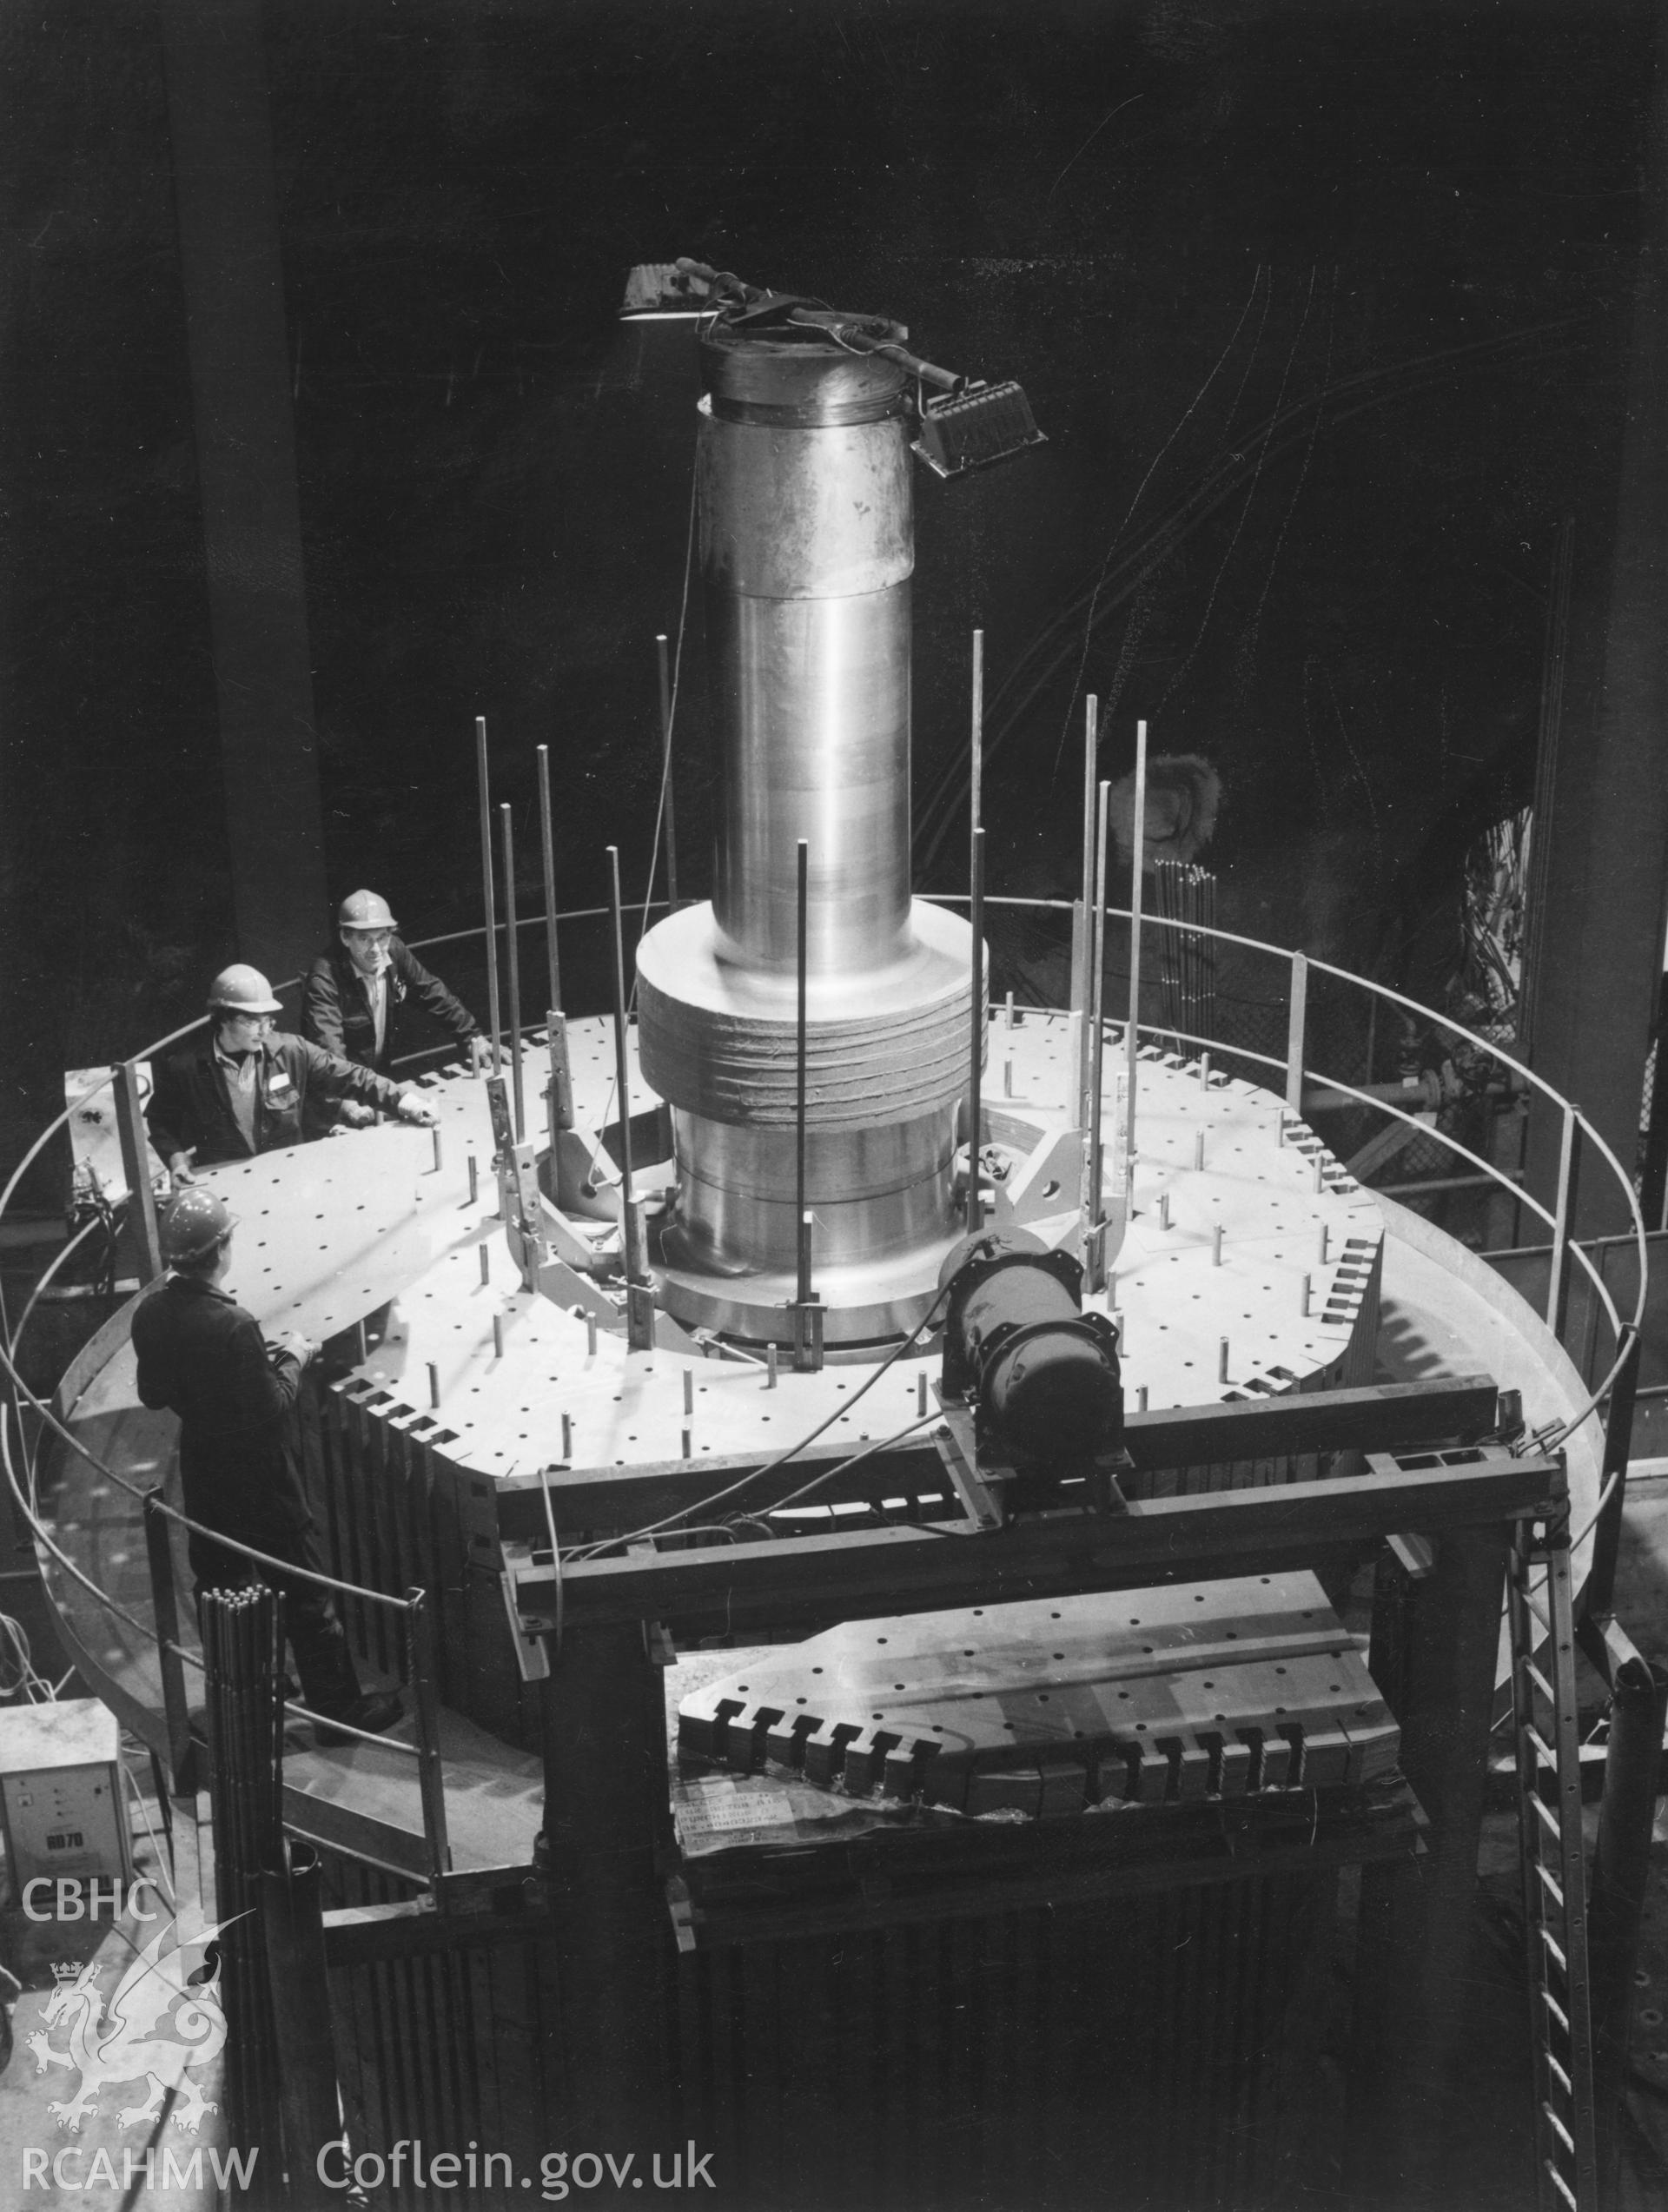 1 b/w print showing assembly work on one of the reversisible generator motors at Dinorwig Power Station; collated by the former Central Office of Information.